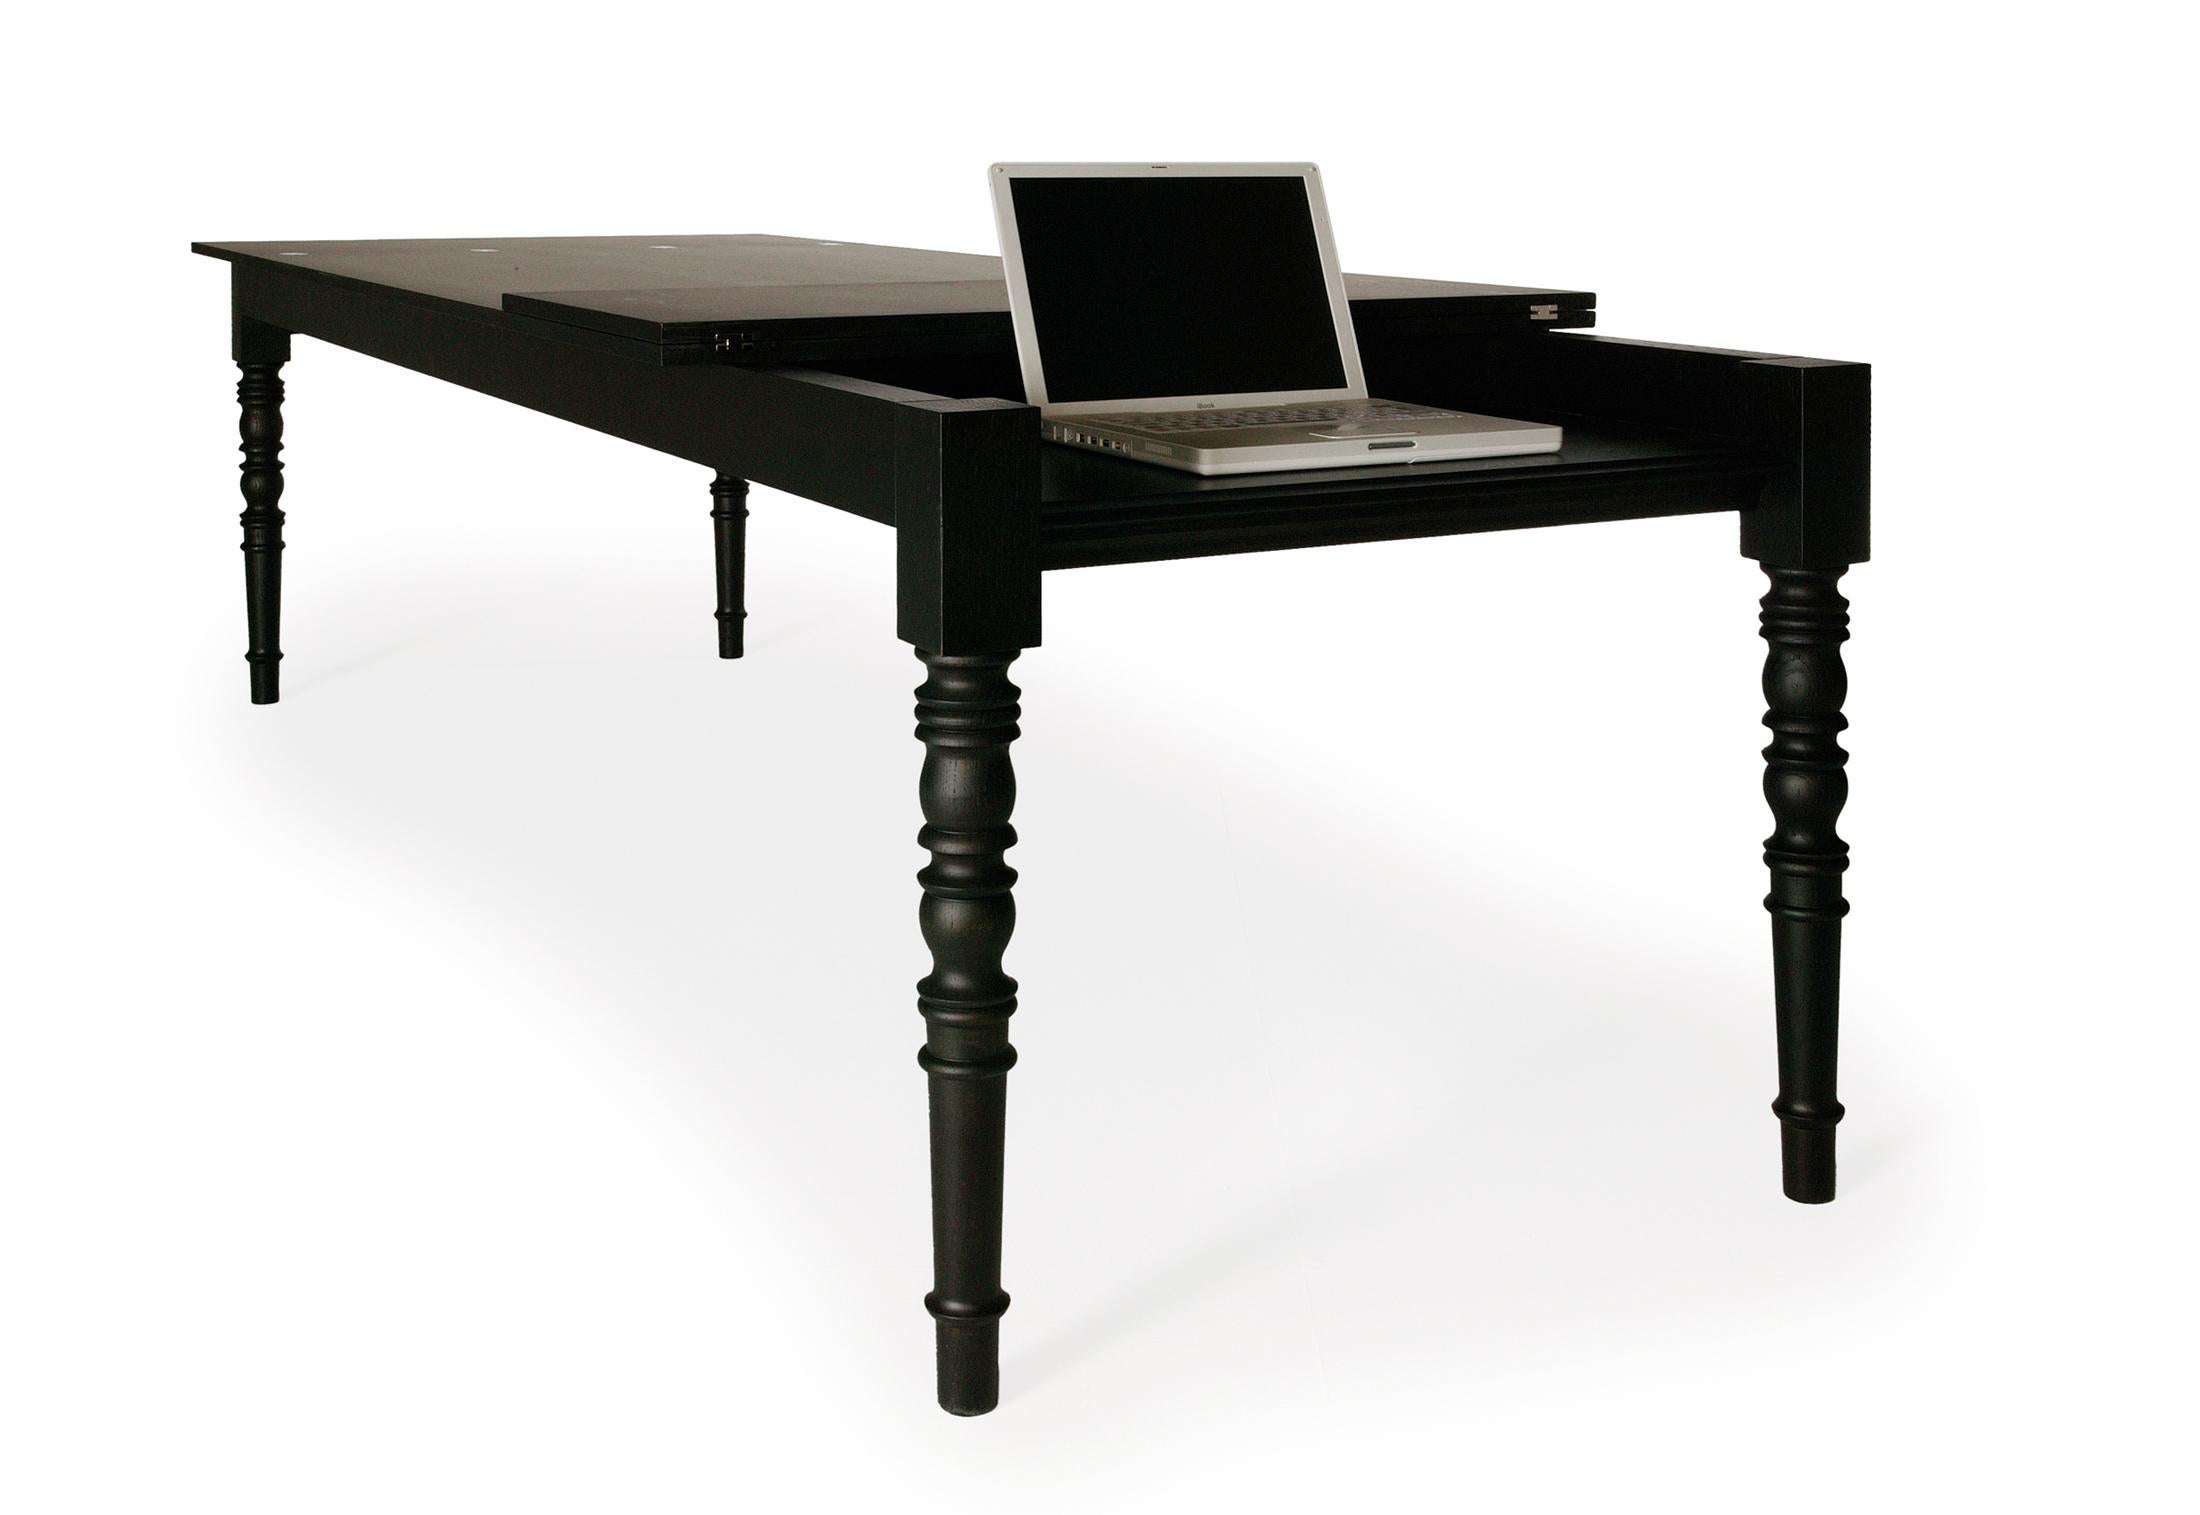 Post-Modern Vintage Top Top Dining Table by Marcel Wanders for Moooi 2004 Utility Desk Black